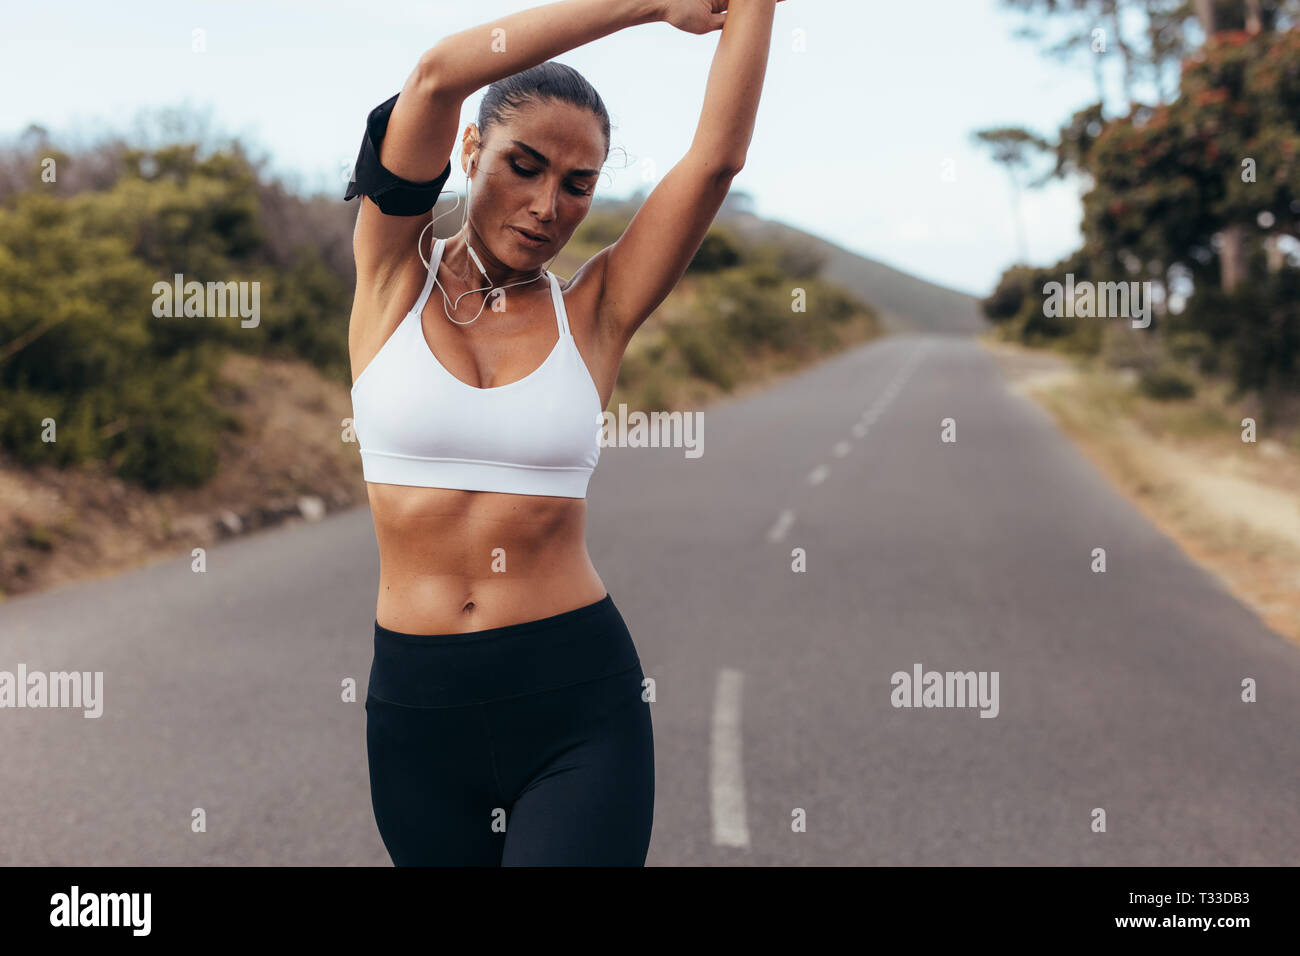 Sporty woman stretching her arms while walking on a empty road in morning. Female runner relaxing her muscles while working out outdoors. Stock Photo